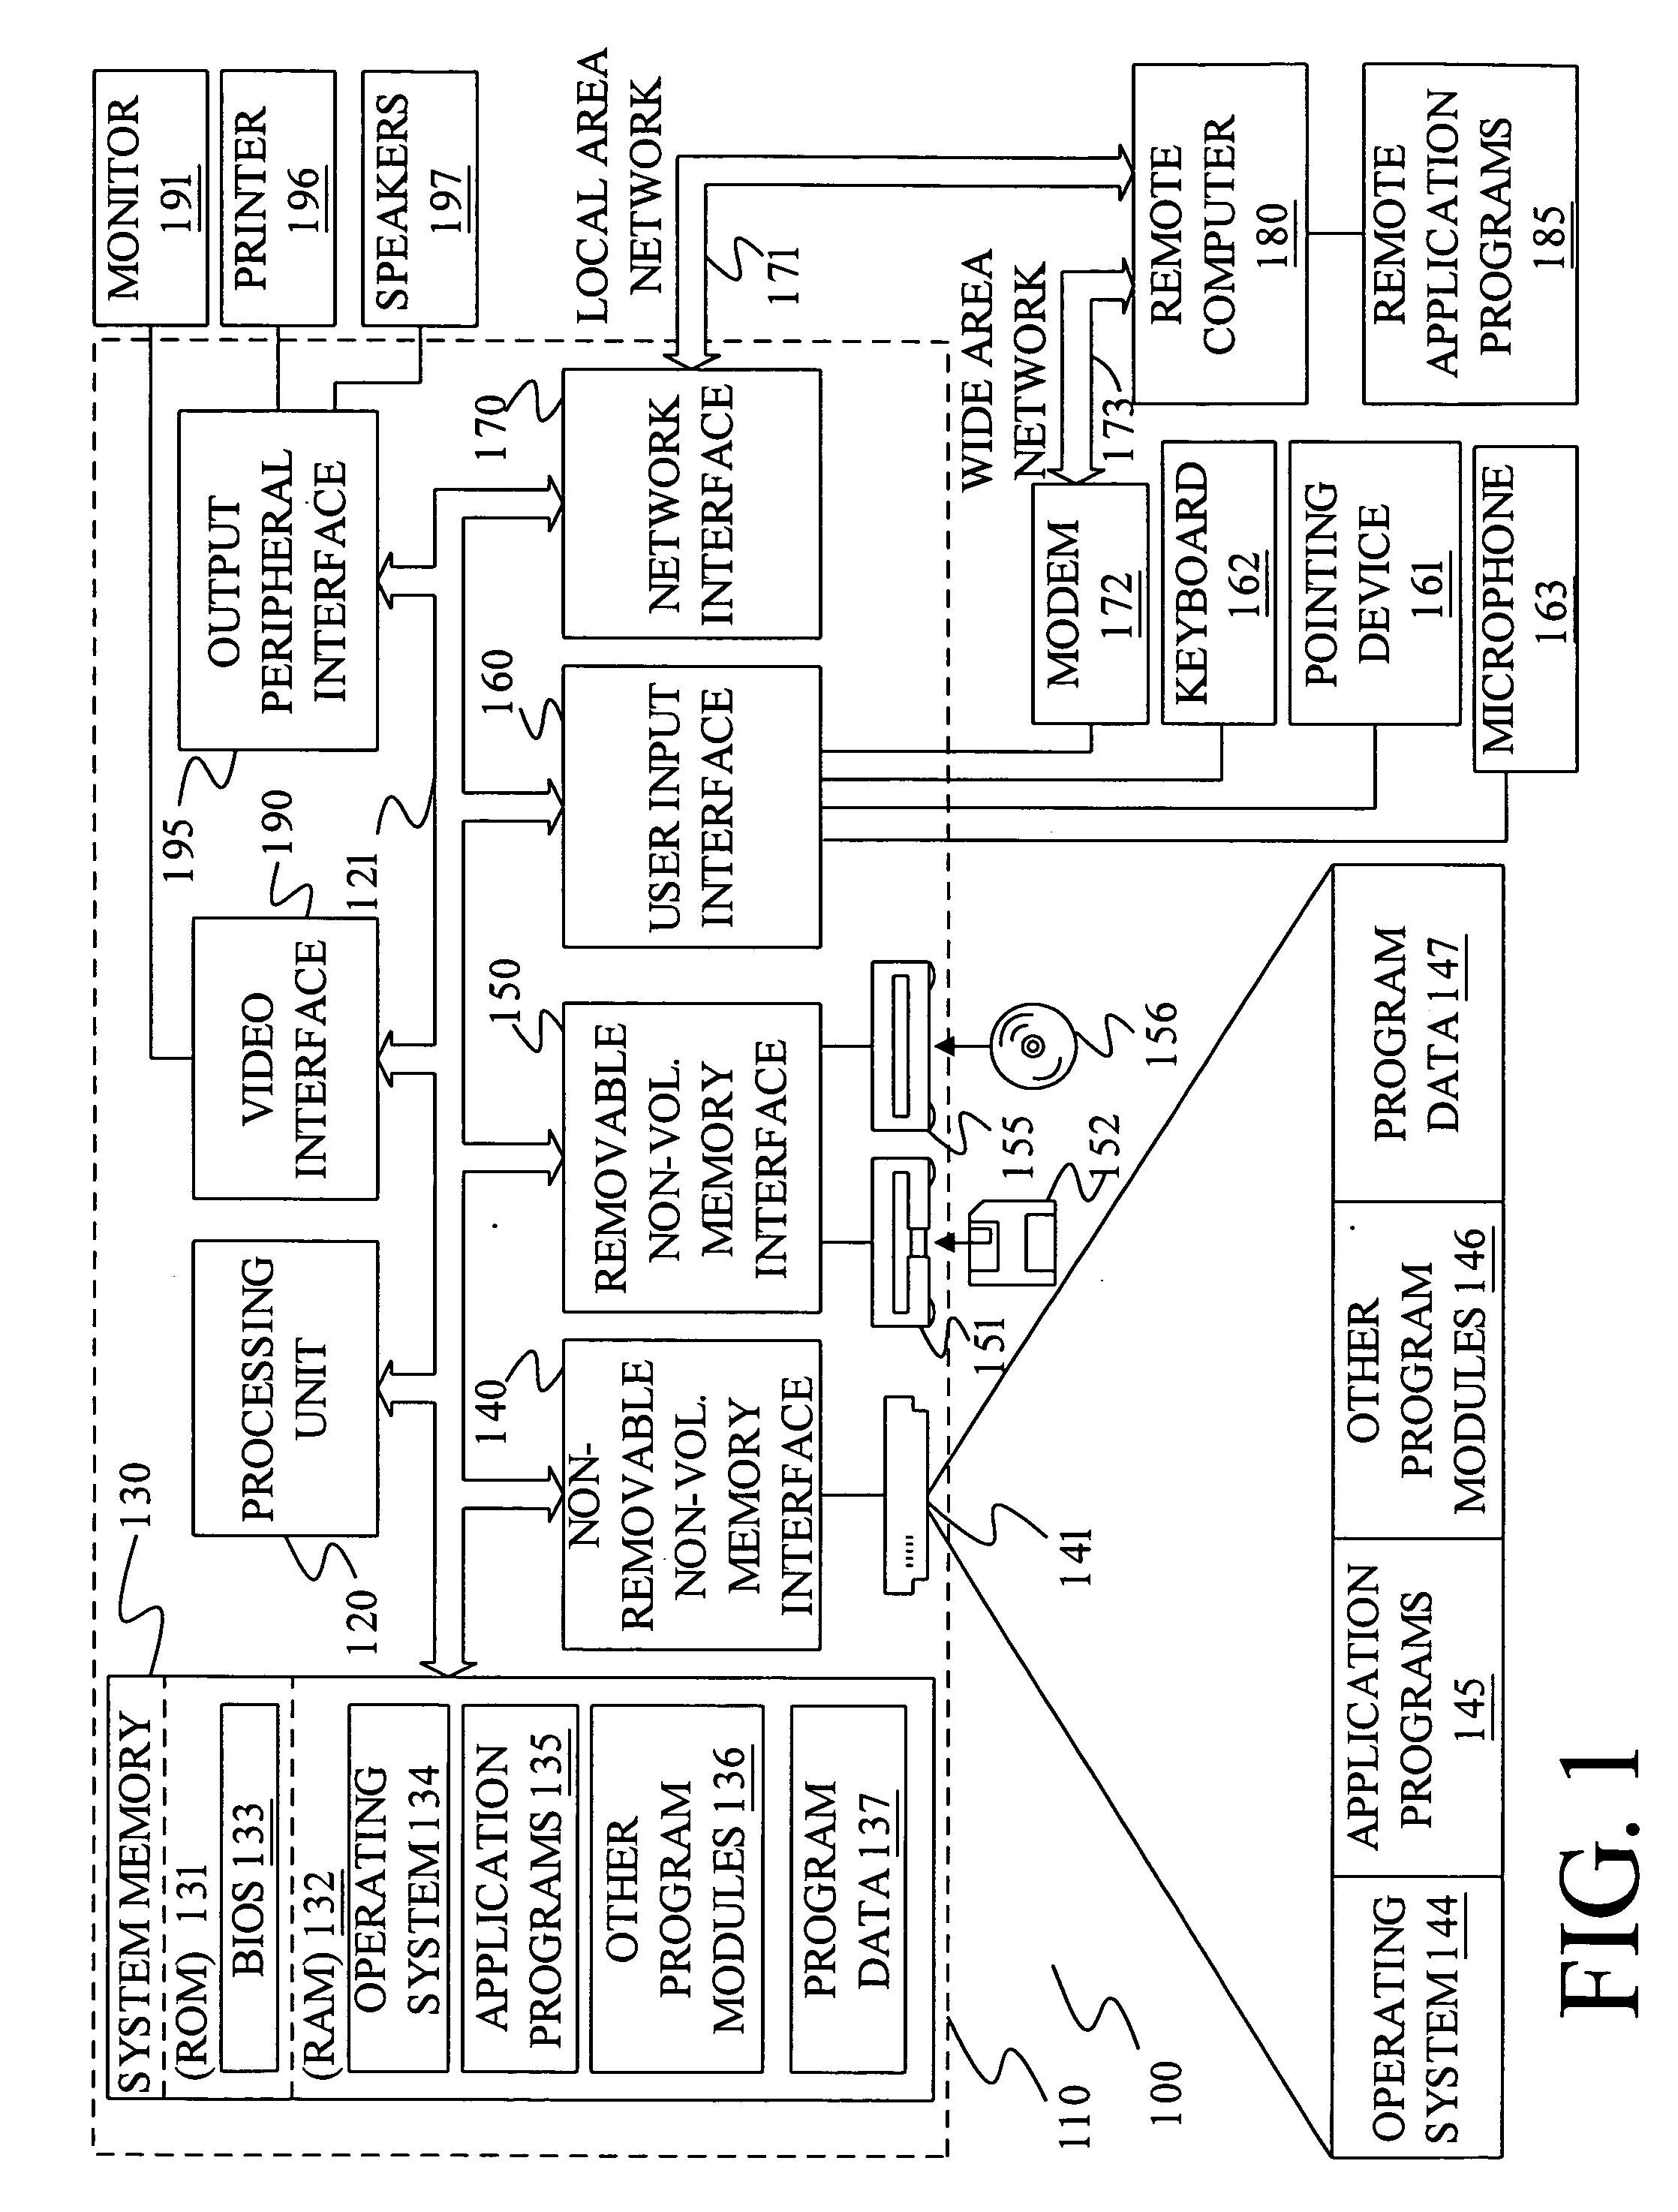 Word collection method and system for use in word-breaking